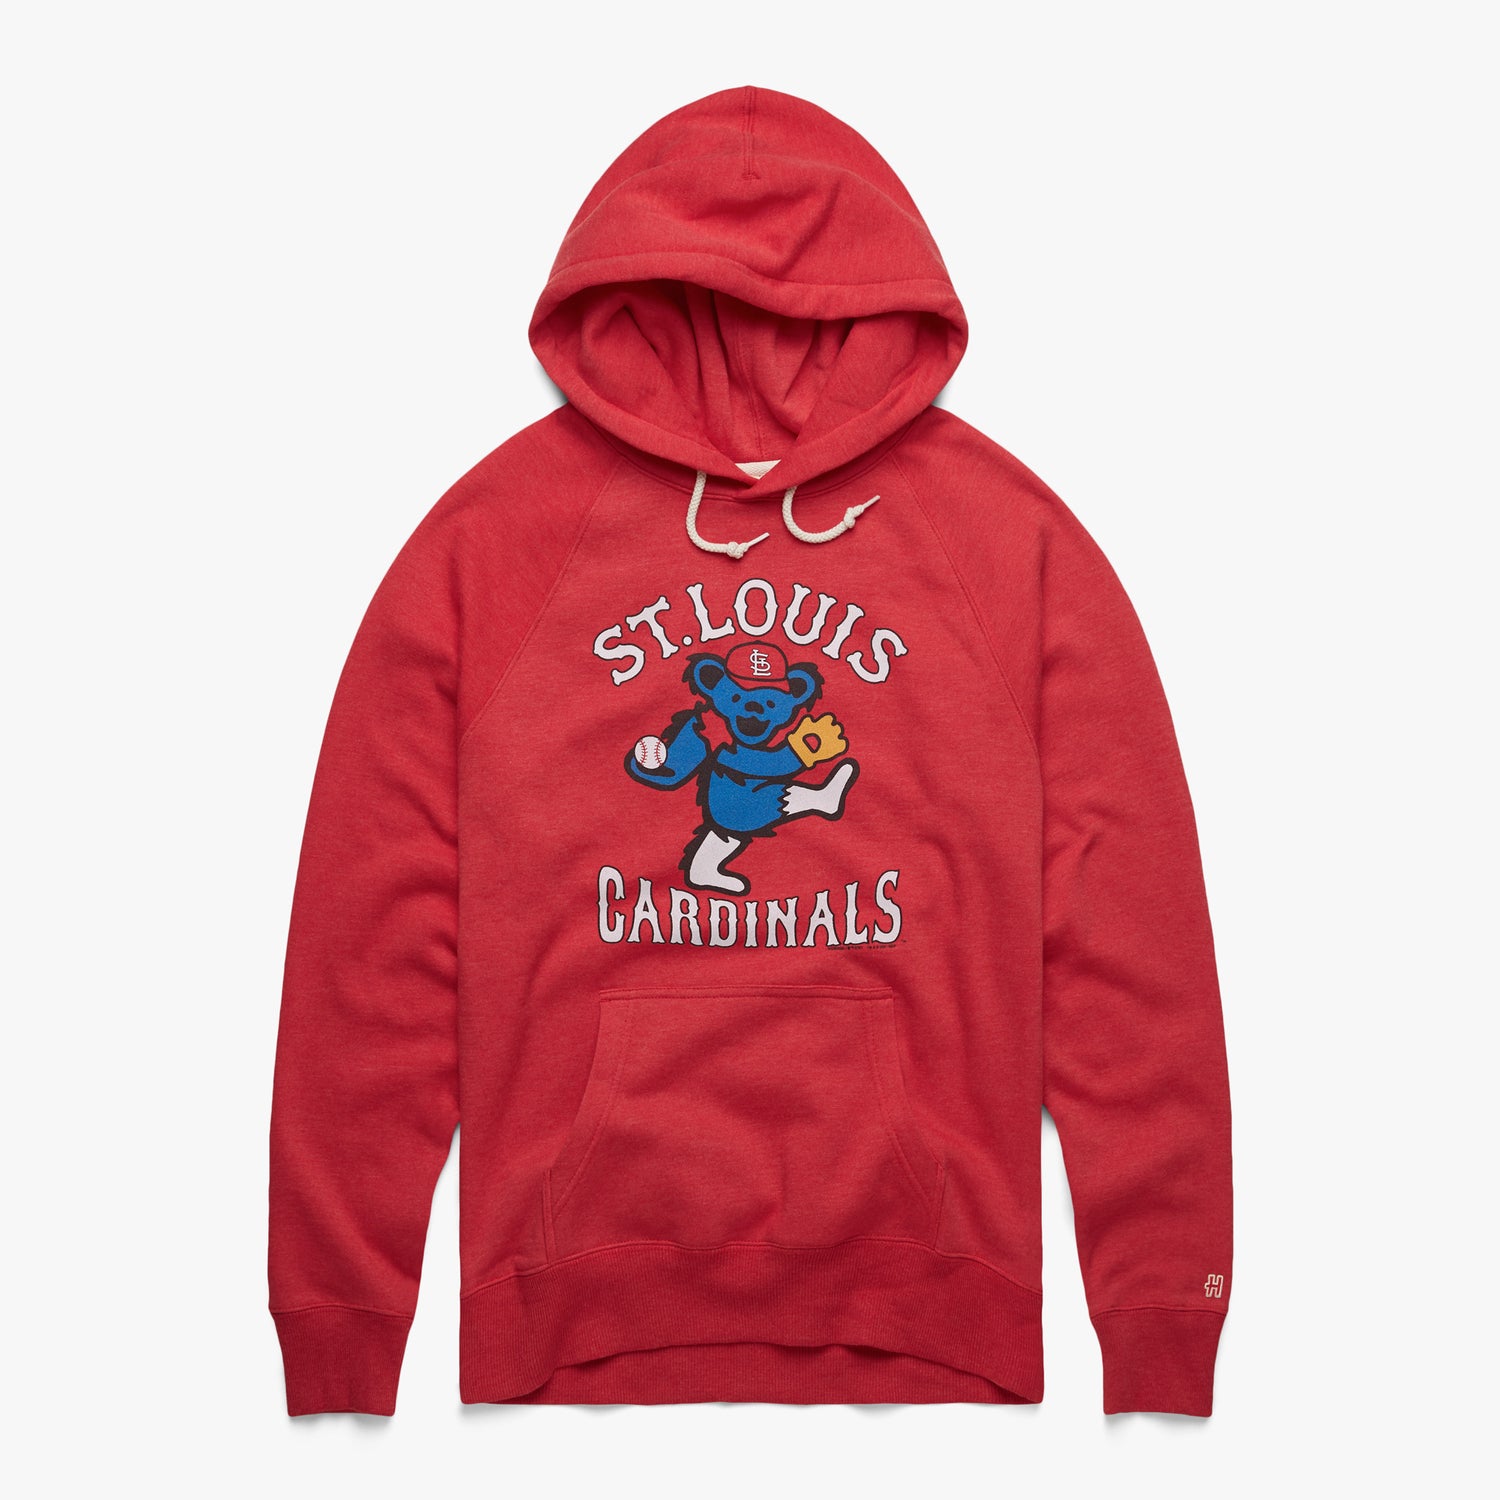 St. Louis Cardinals - Deadheads are going to love this lightweight hooded  pullover for Grateful Dead Tribute Night on Friday, May 10th. #CardsTheme